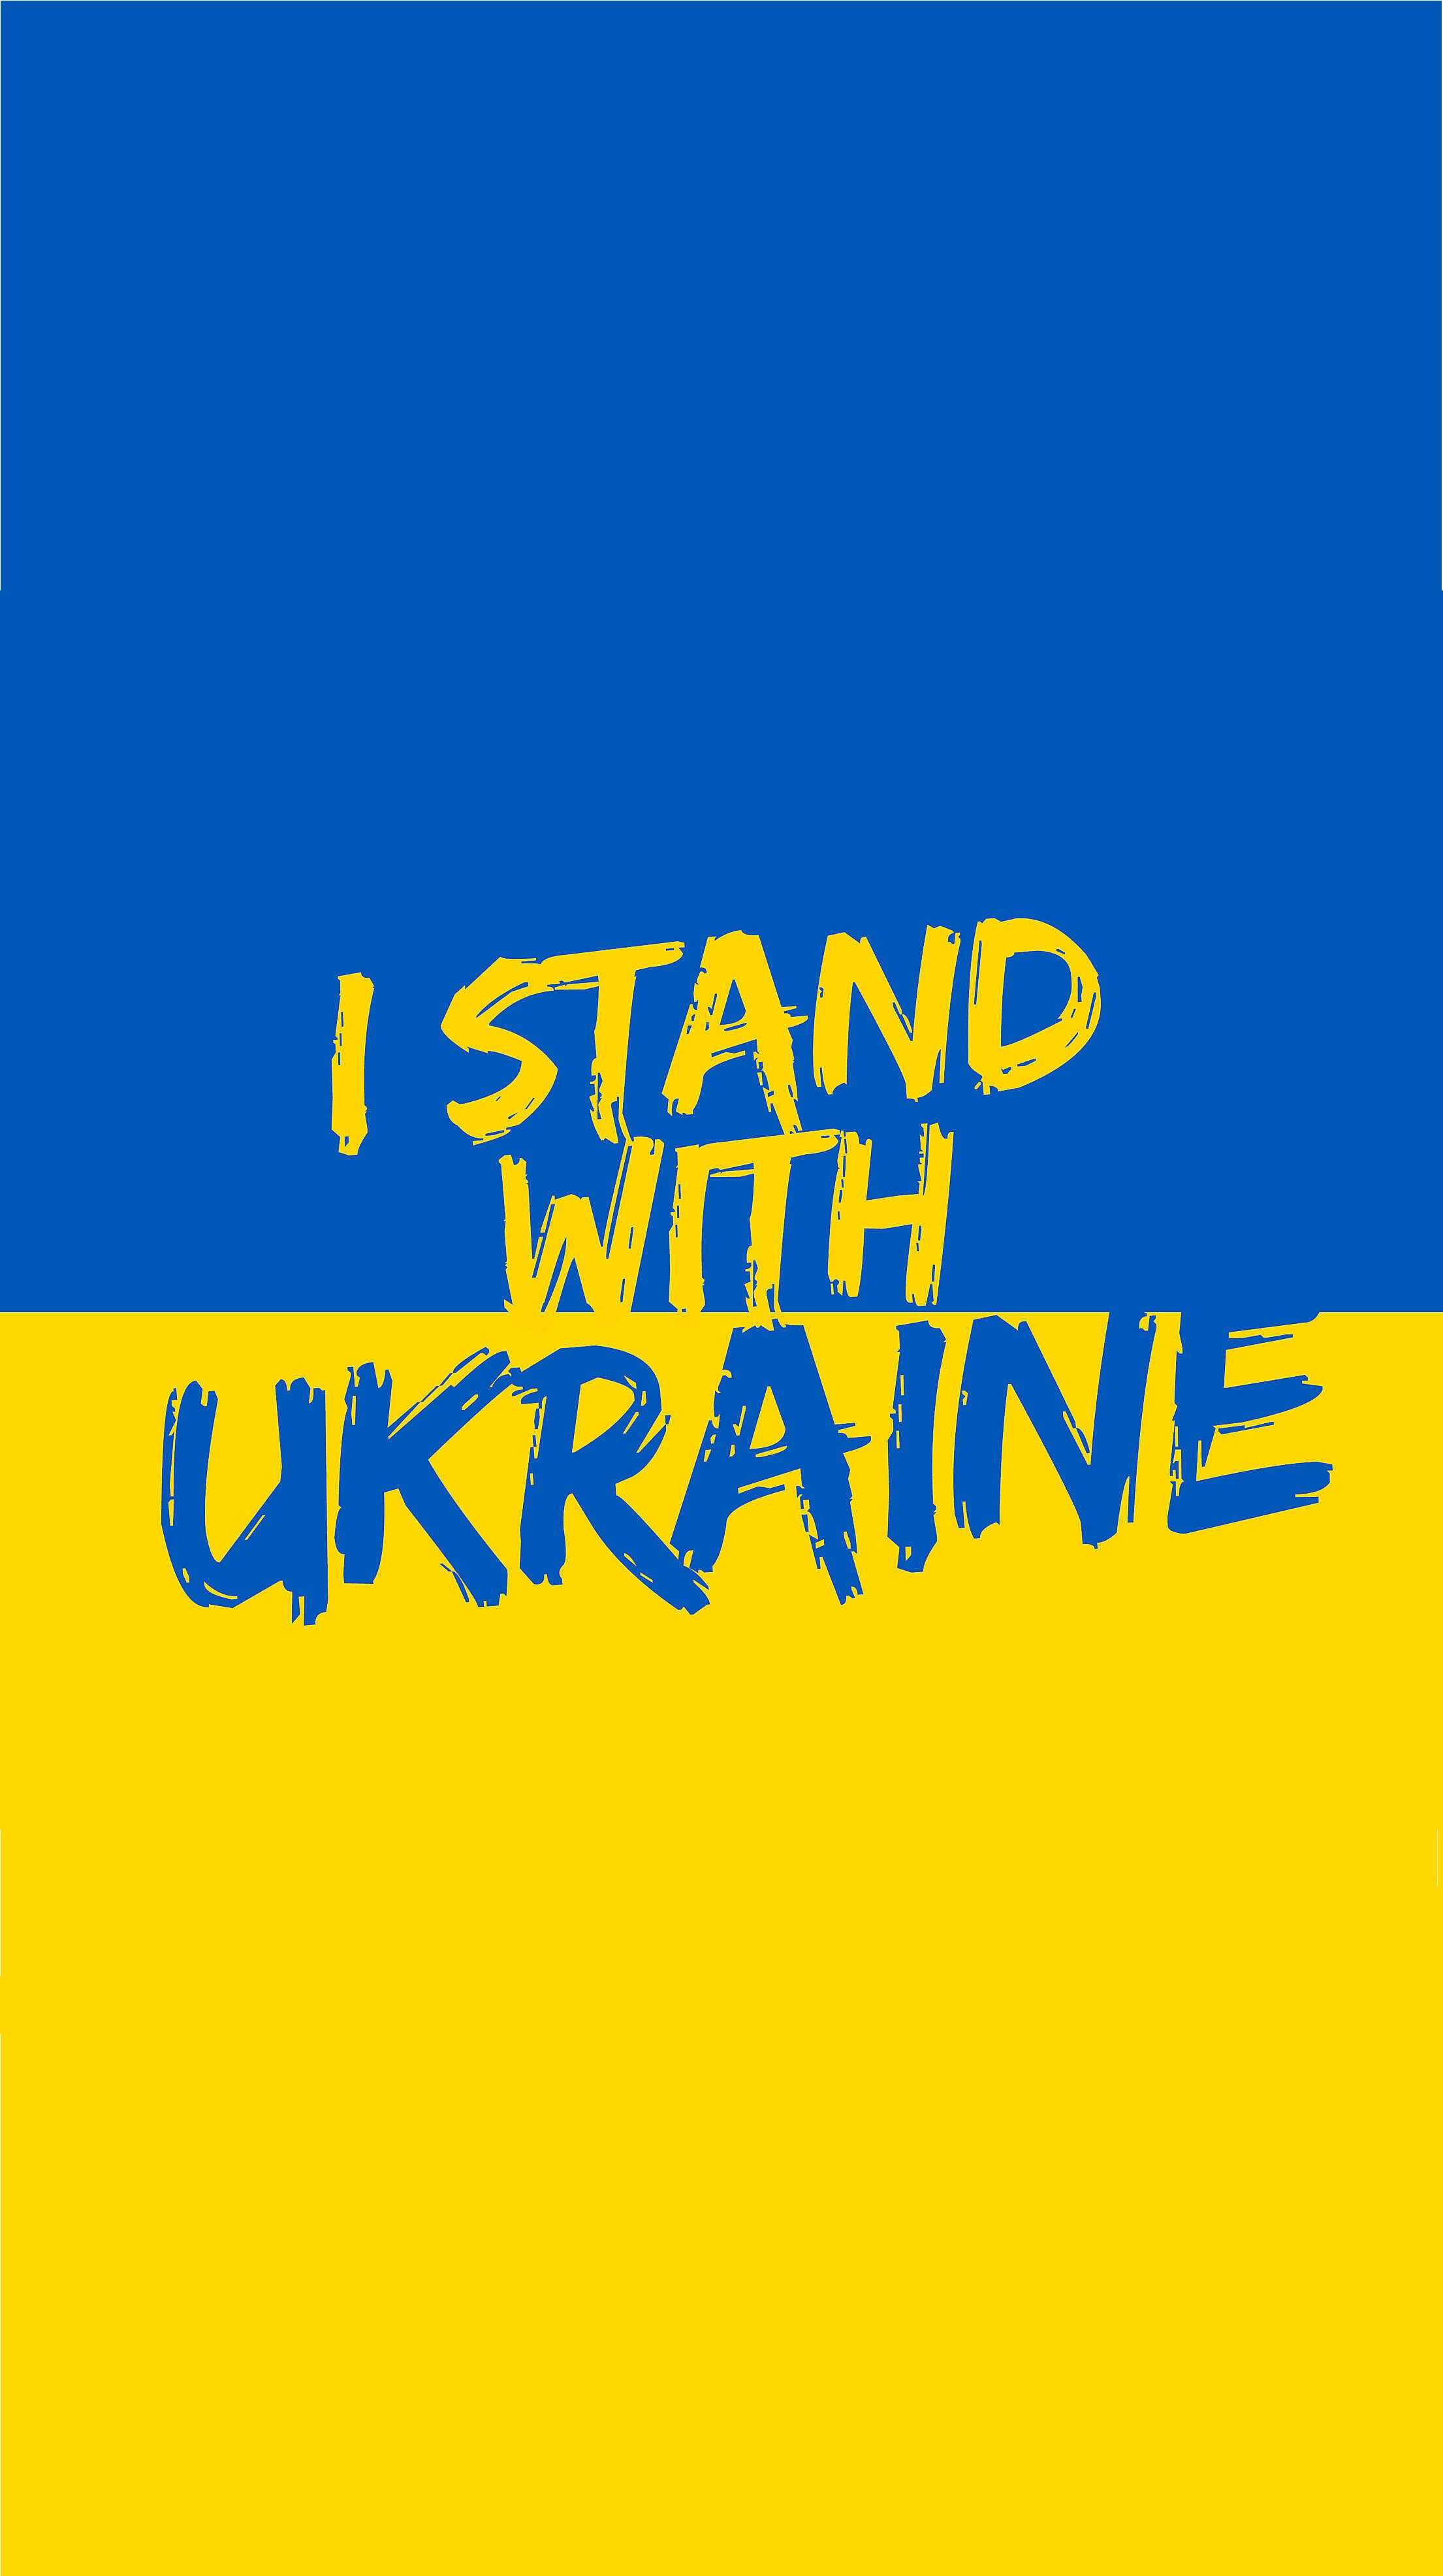 iPhone I Stand With Ukraine Wallpaper